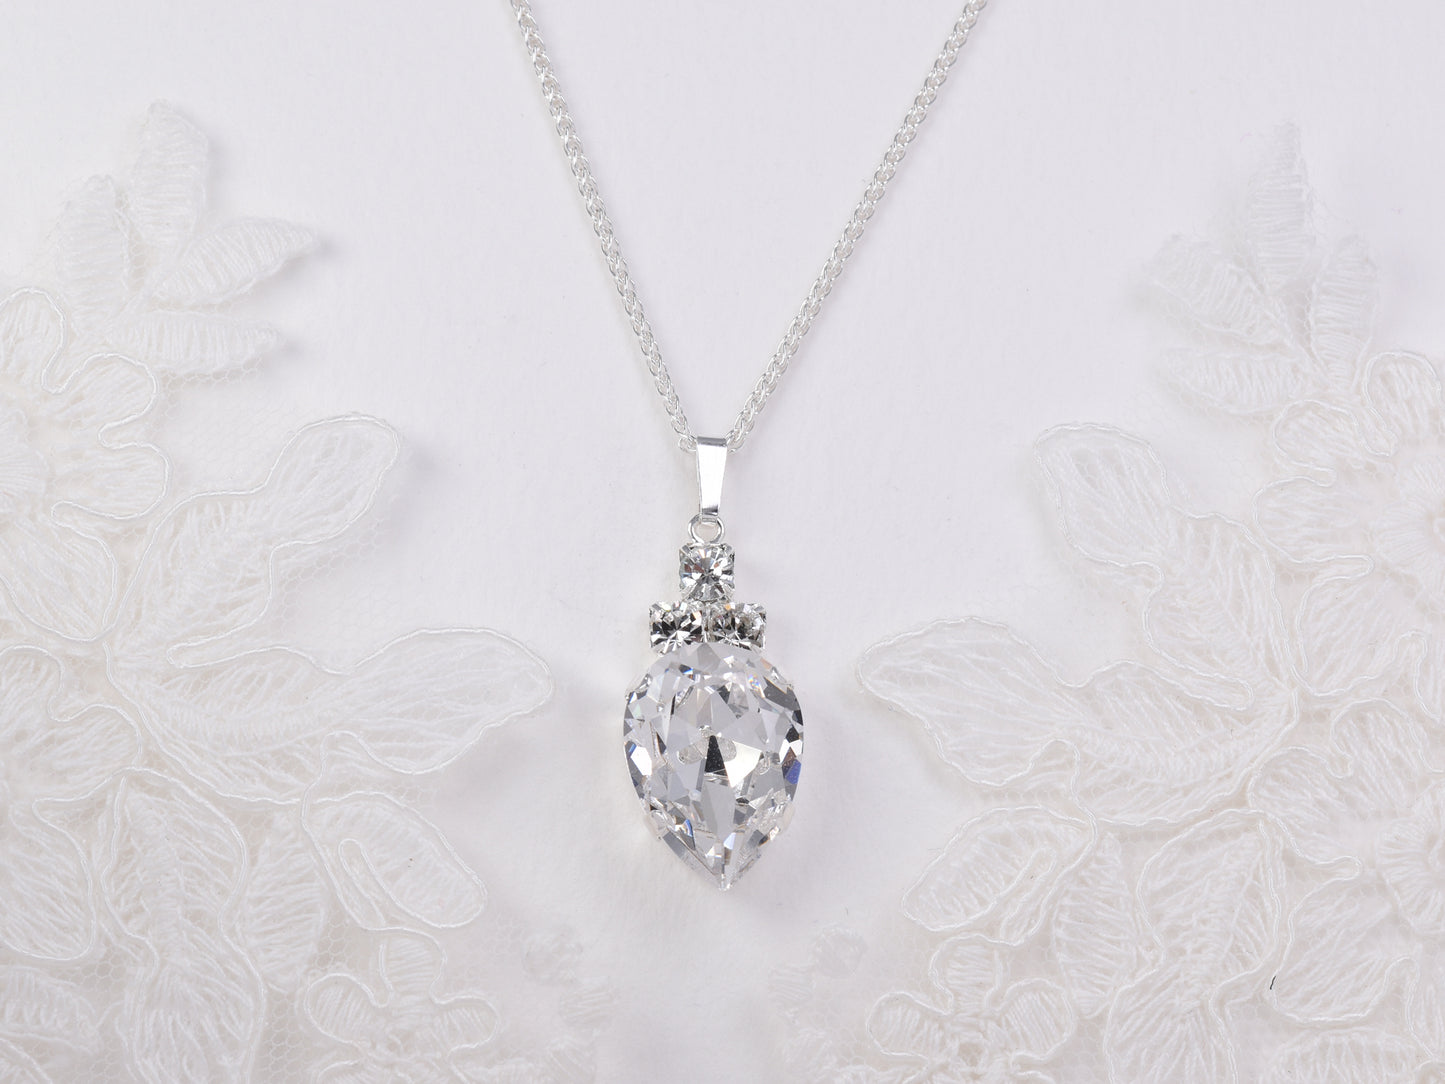 Jeane - Stylish crystal pendant necklace with sterling silver chain.